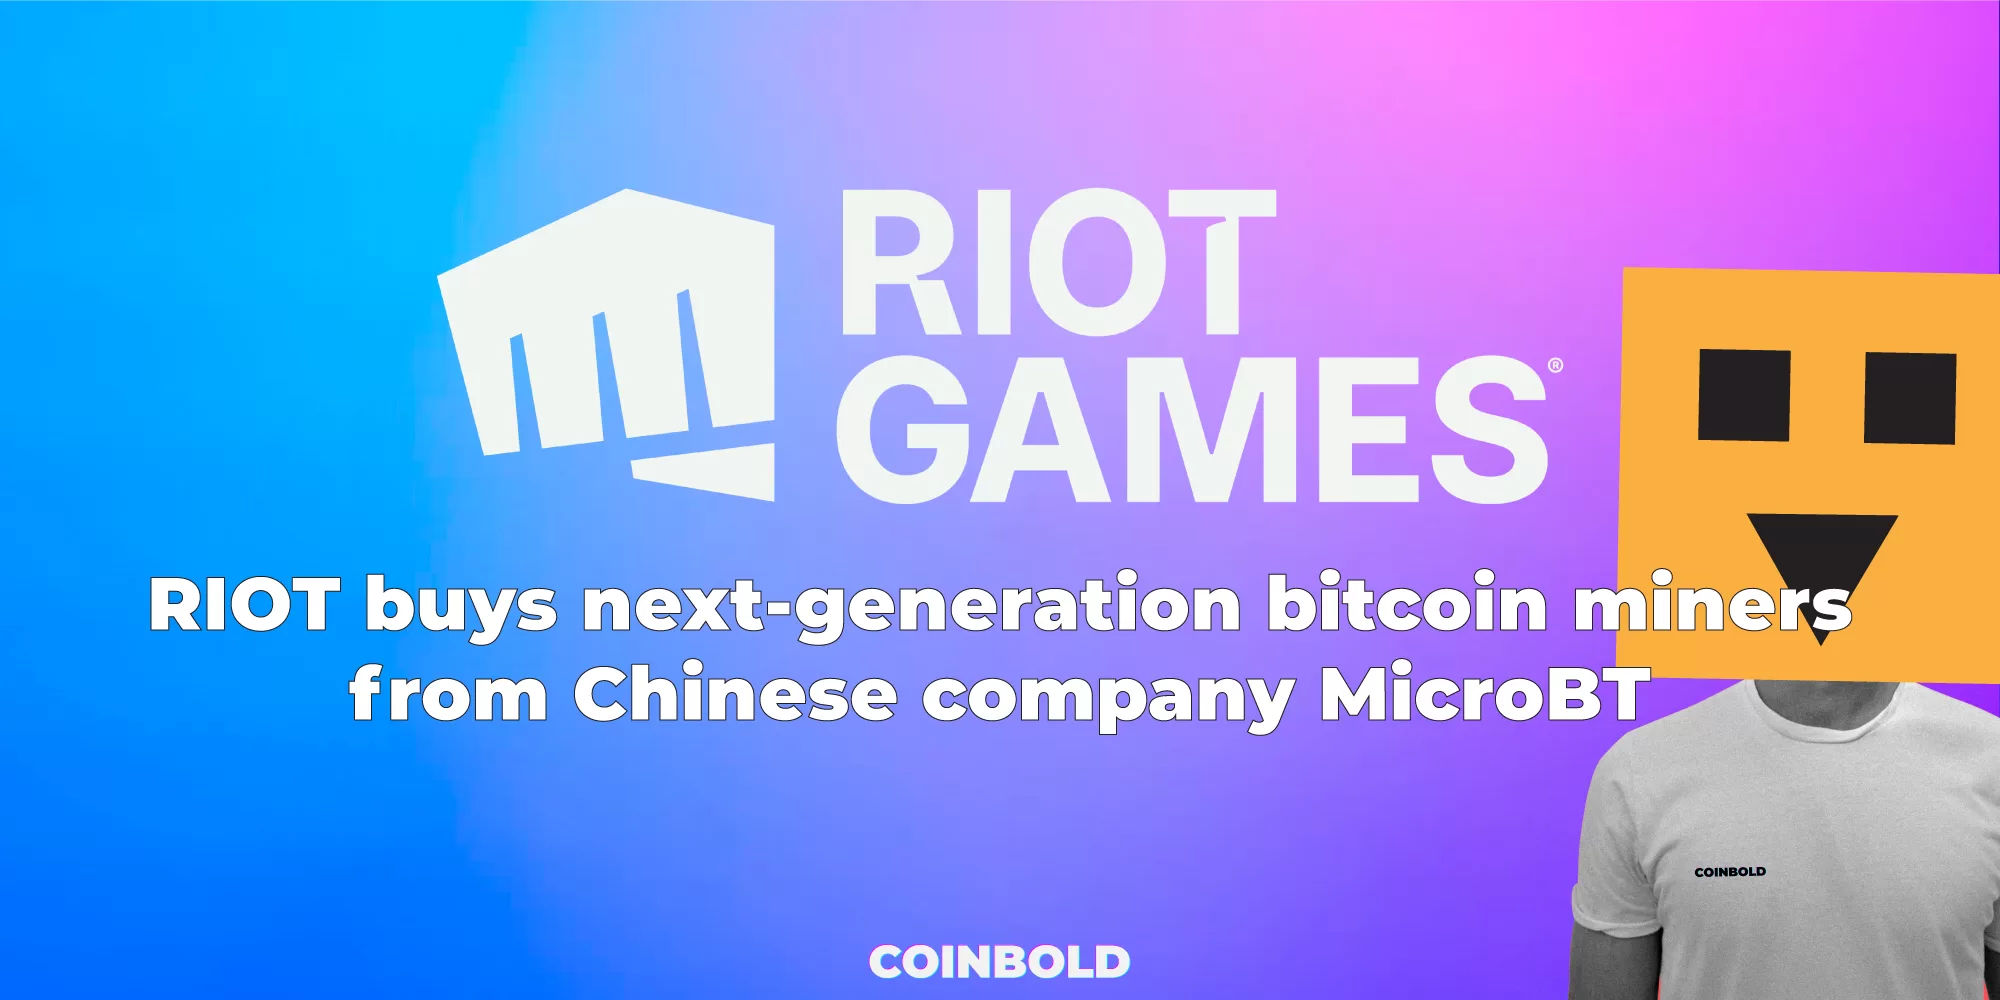 RIOT buys next-generation bitcoin miners from Chinese company MicroBT